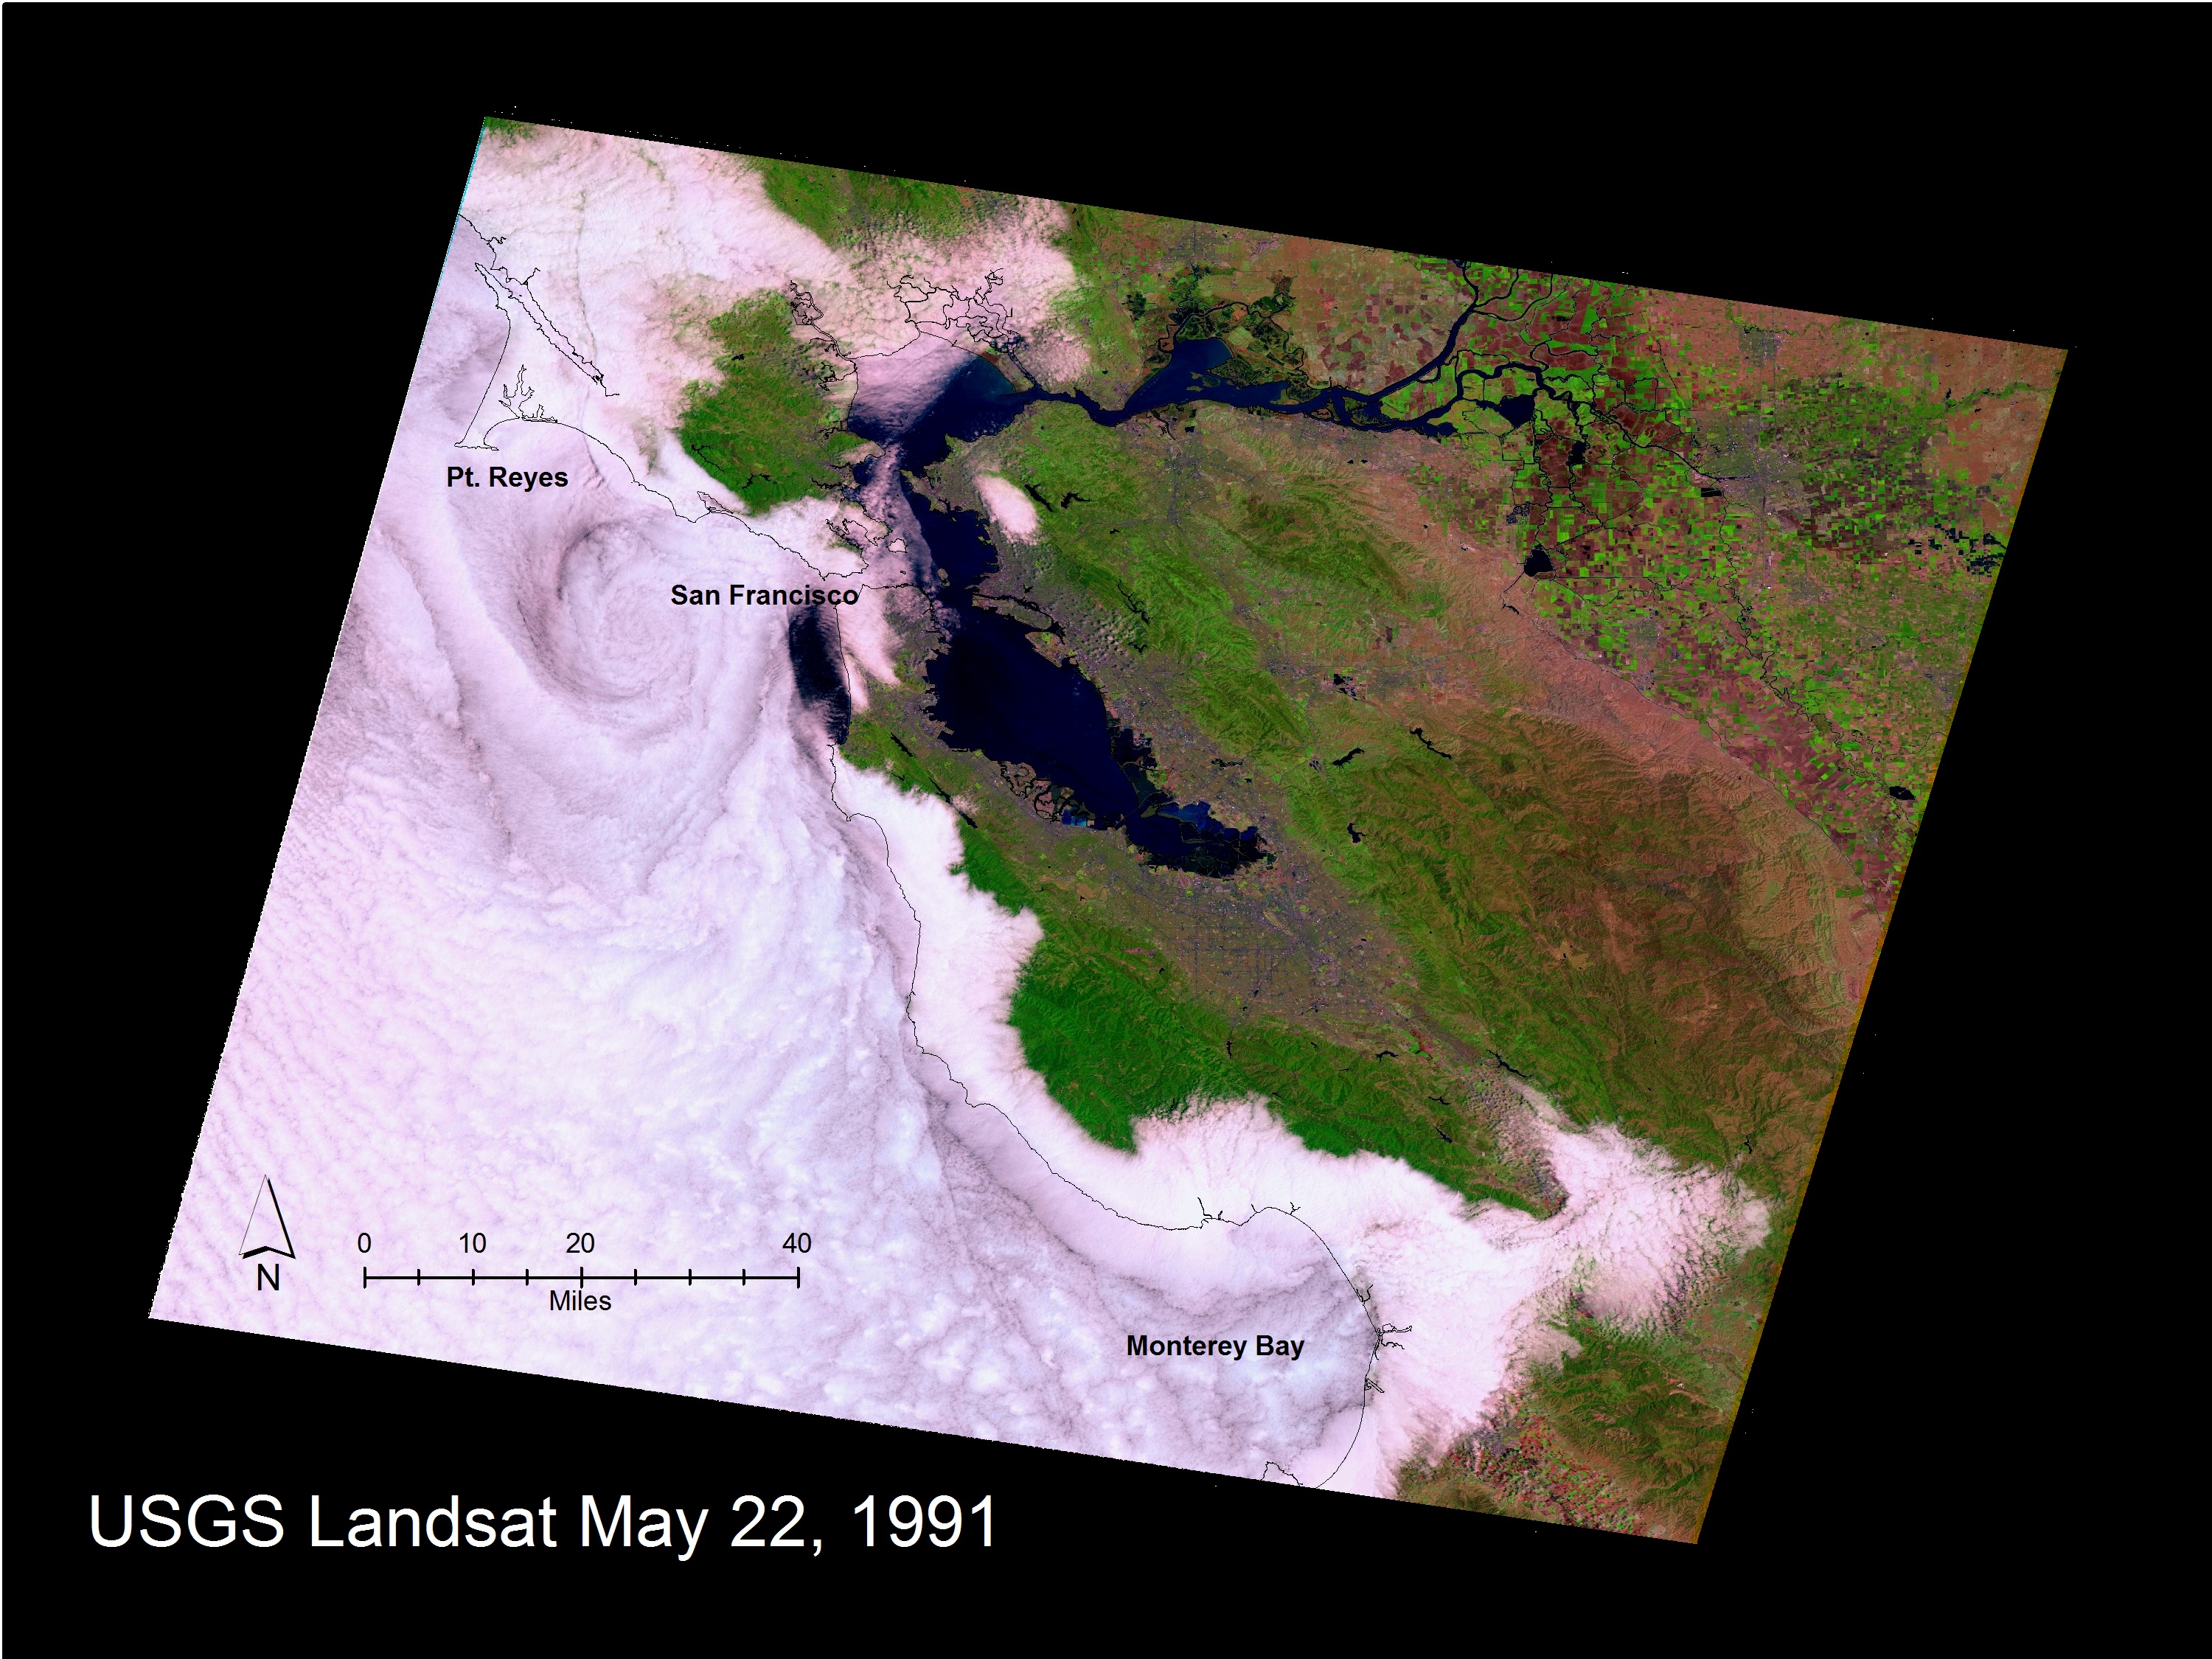 A Landsat image from May 22, 1991, shows the relative position of the coastline, mapped as a black line on top of the marine stratus and stratocumulus cloud layer along the San Francisco to Monterey, California, coastline. The effect of coastal mountains that form a topographic barrier keeping the marine layer offshore is visible, as are the gaps north of Point Reyes and to the east of Monterey Bay through which the clouds penetrate. A complex eddy pattern can be seen offshore of San Francisco in the lee of the Point Reyes peninsula that juts out to sea.